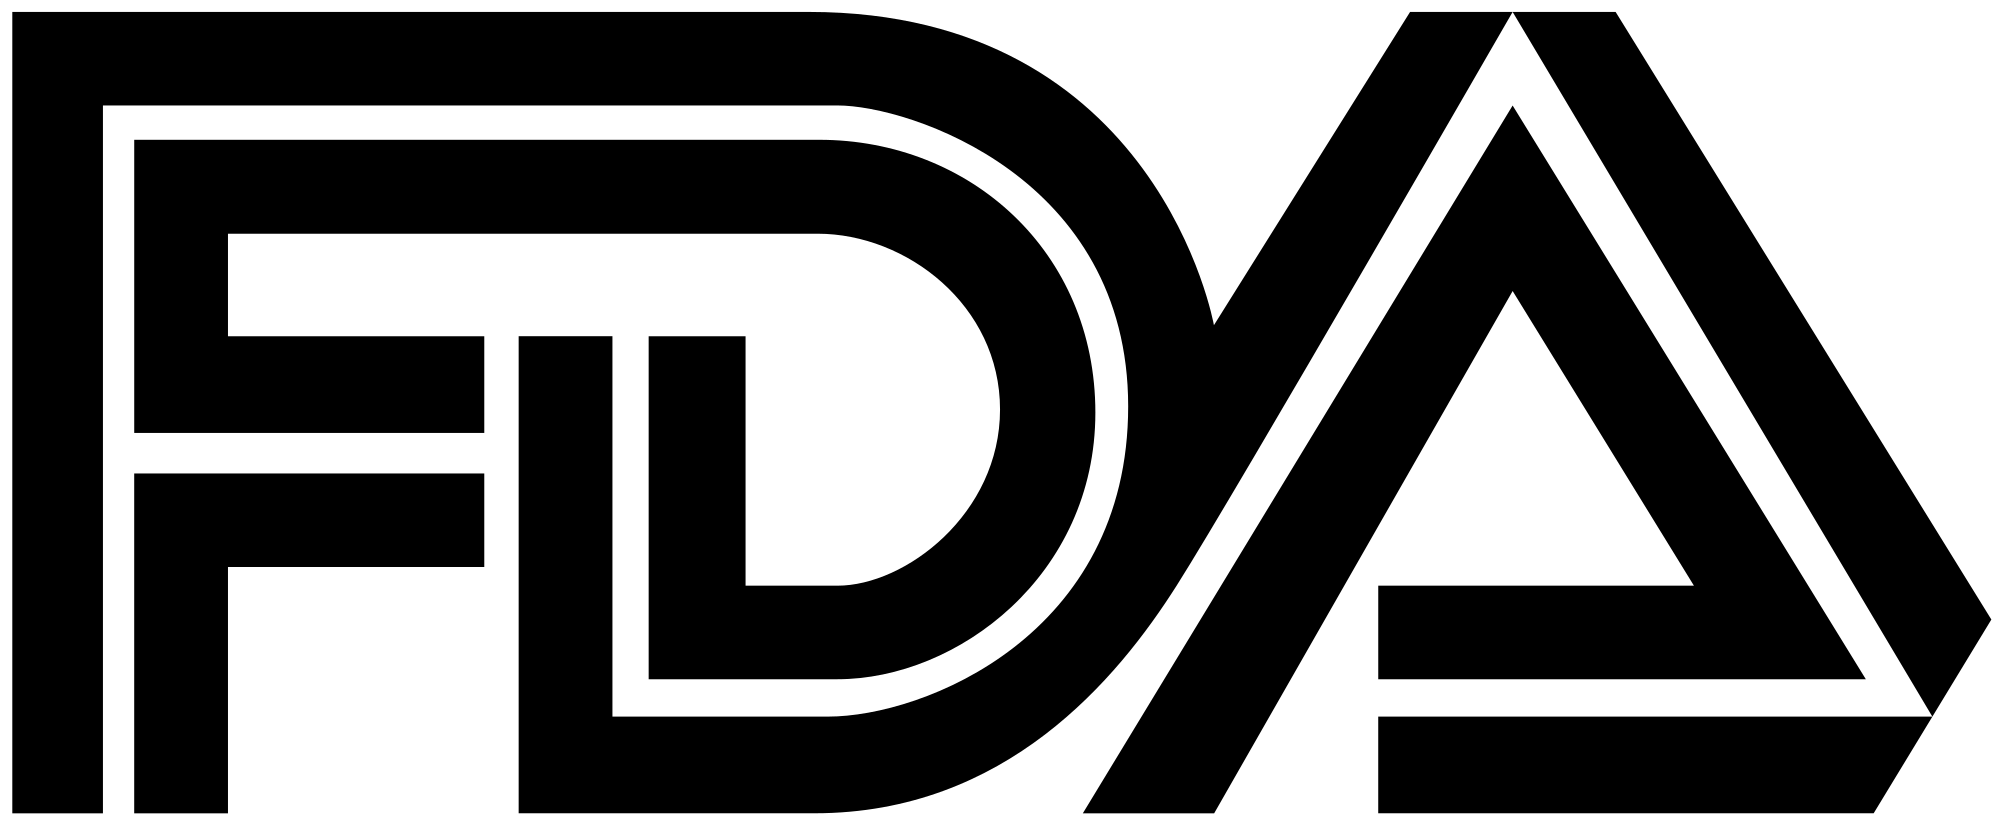 FDA Official Logo - File:Food and Drug Administration logo.svg - Wikimedia Commons